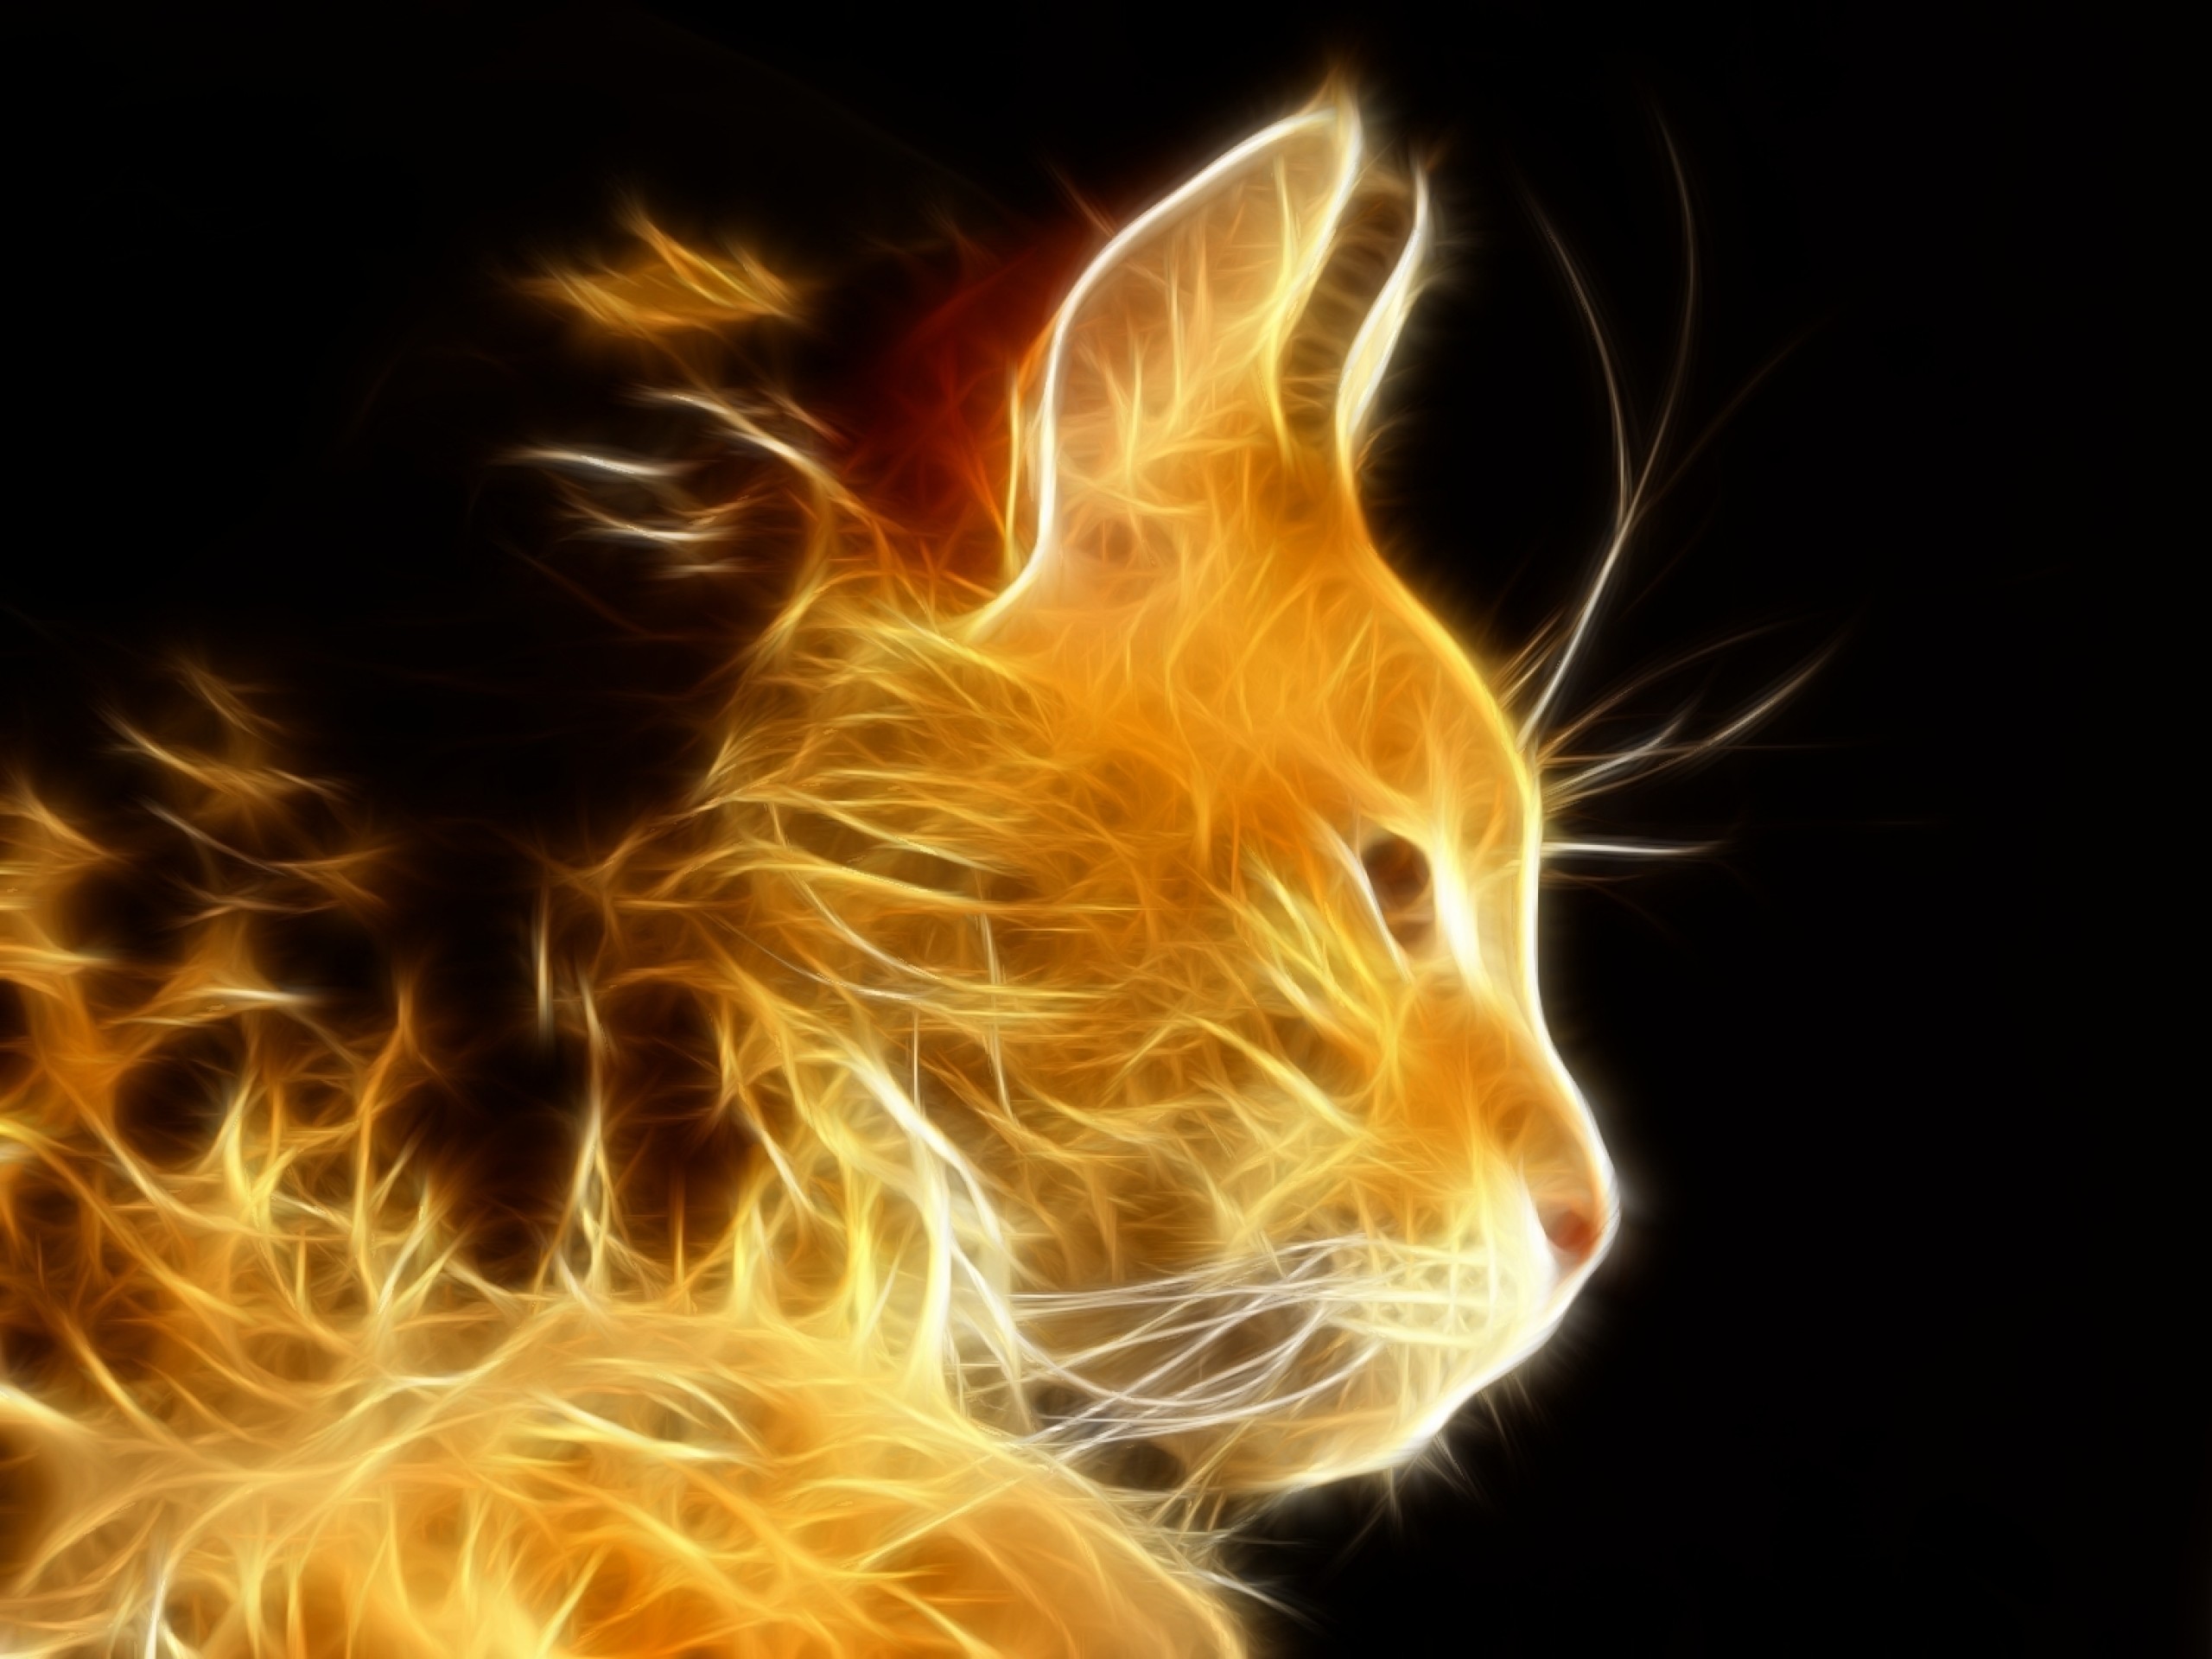 Space Cat Wallpaper. Background. Photo. Image